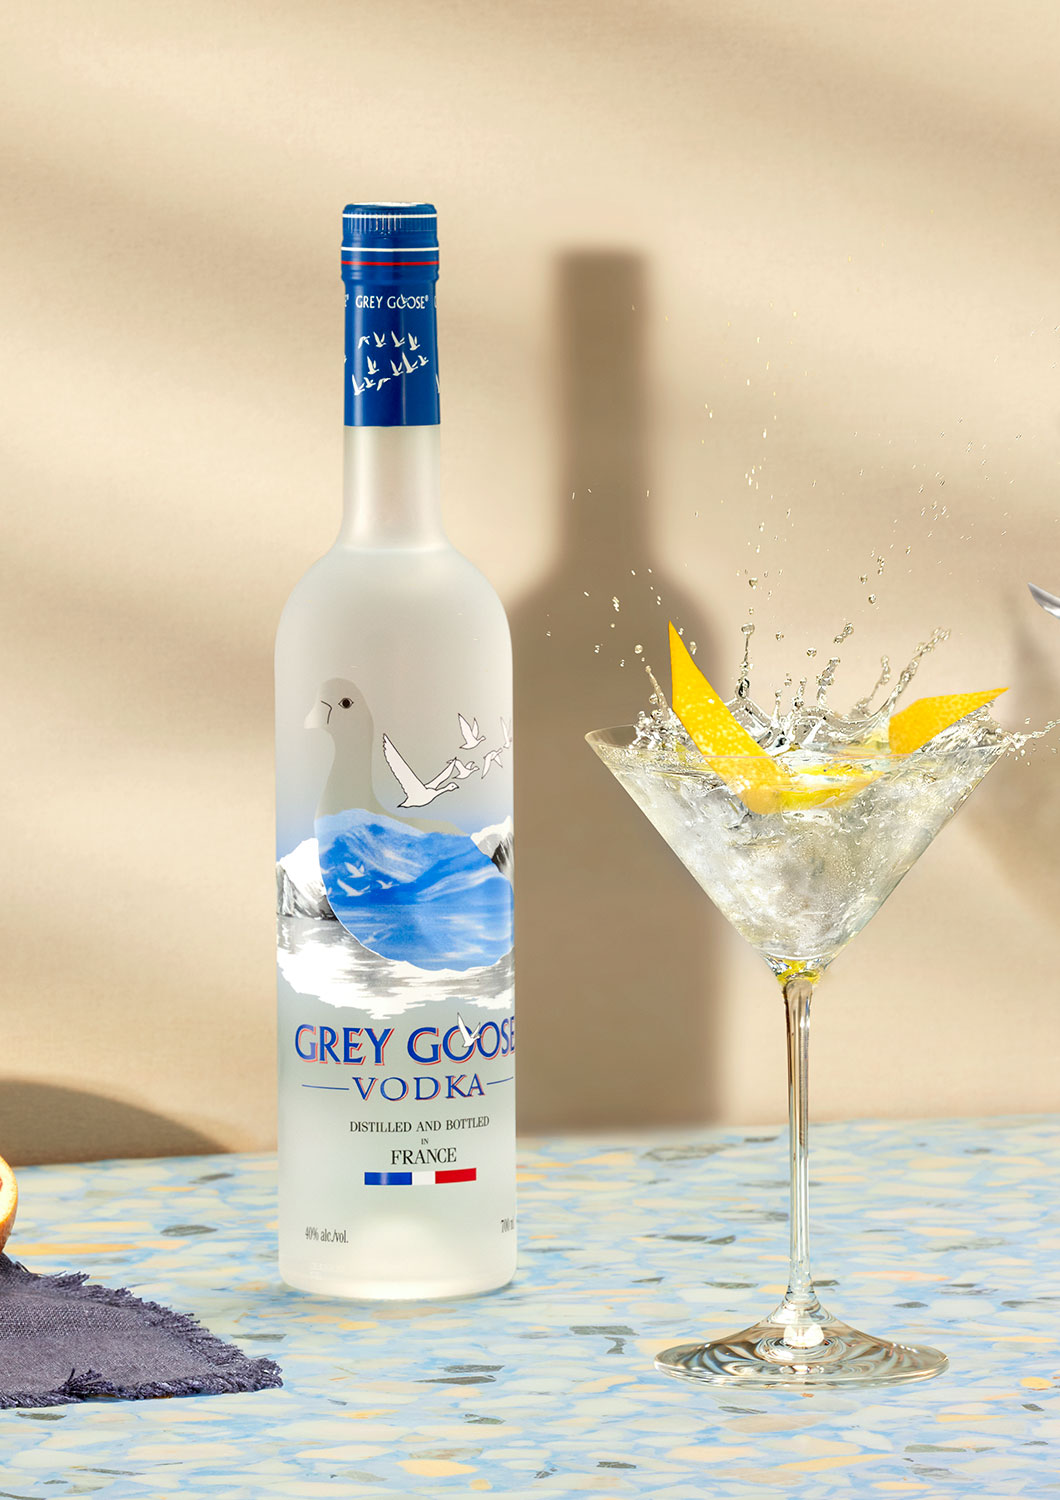 Interview: A History of Grey Goose